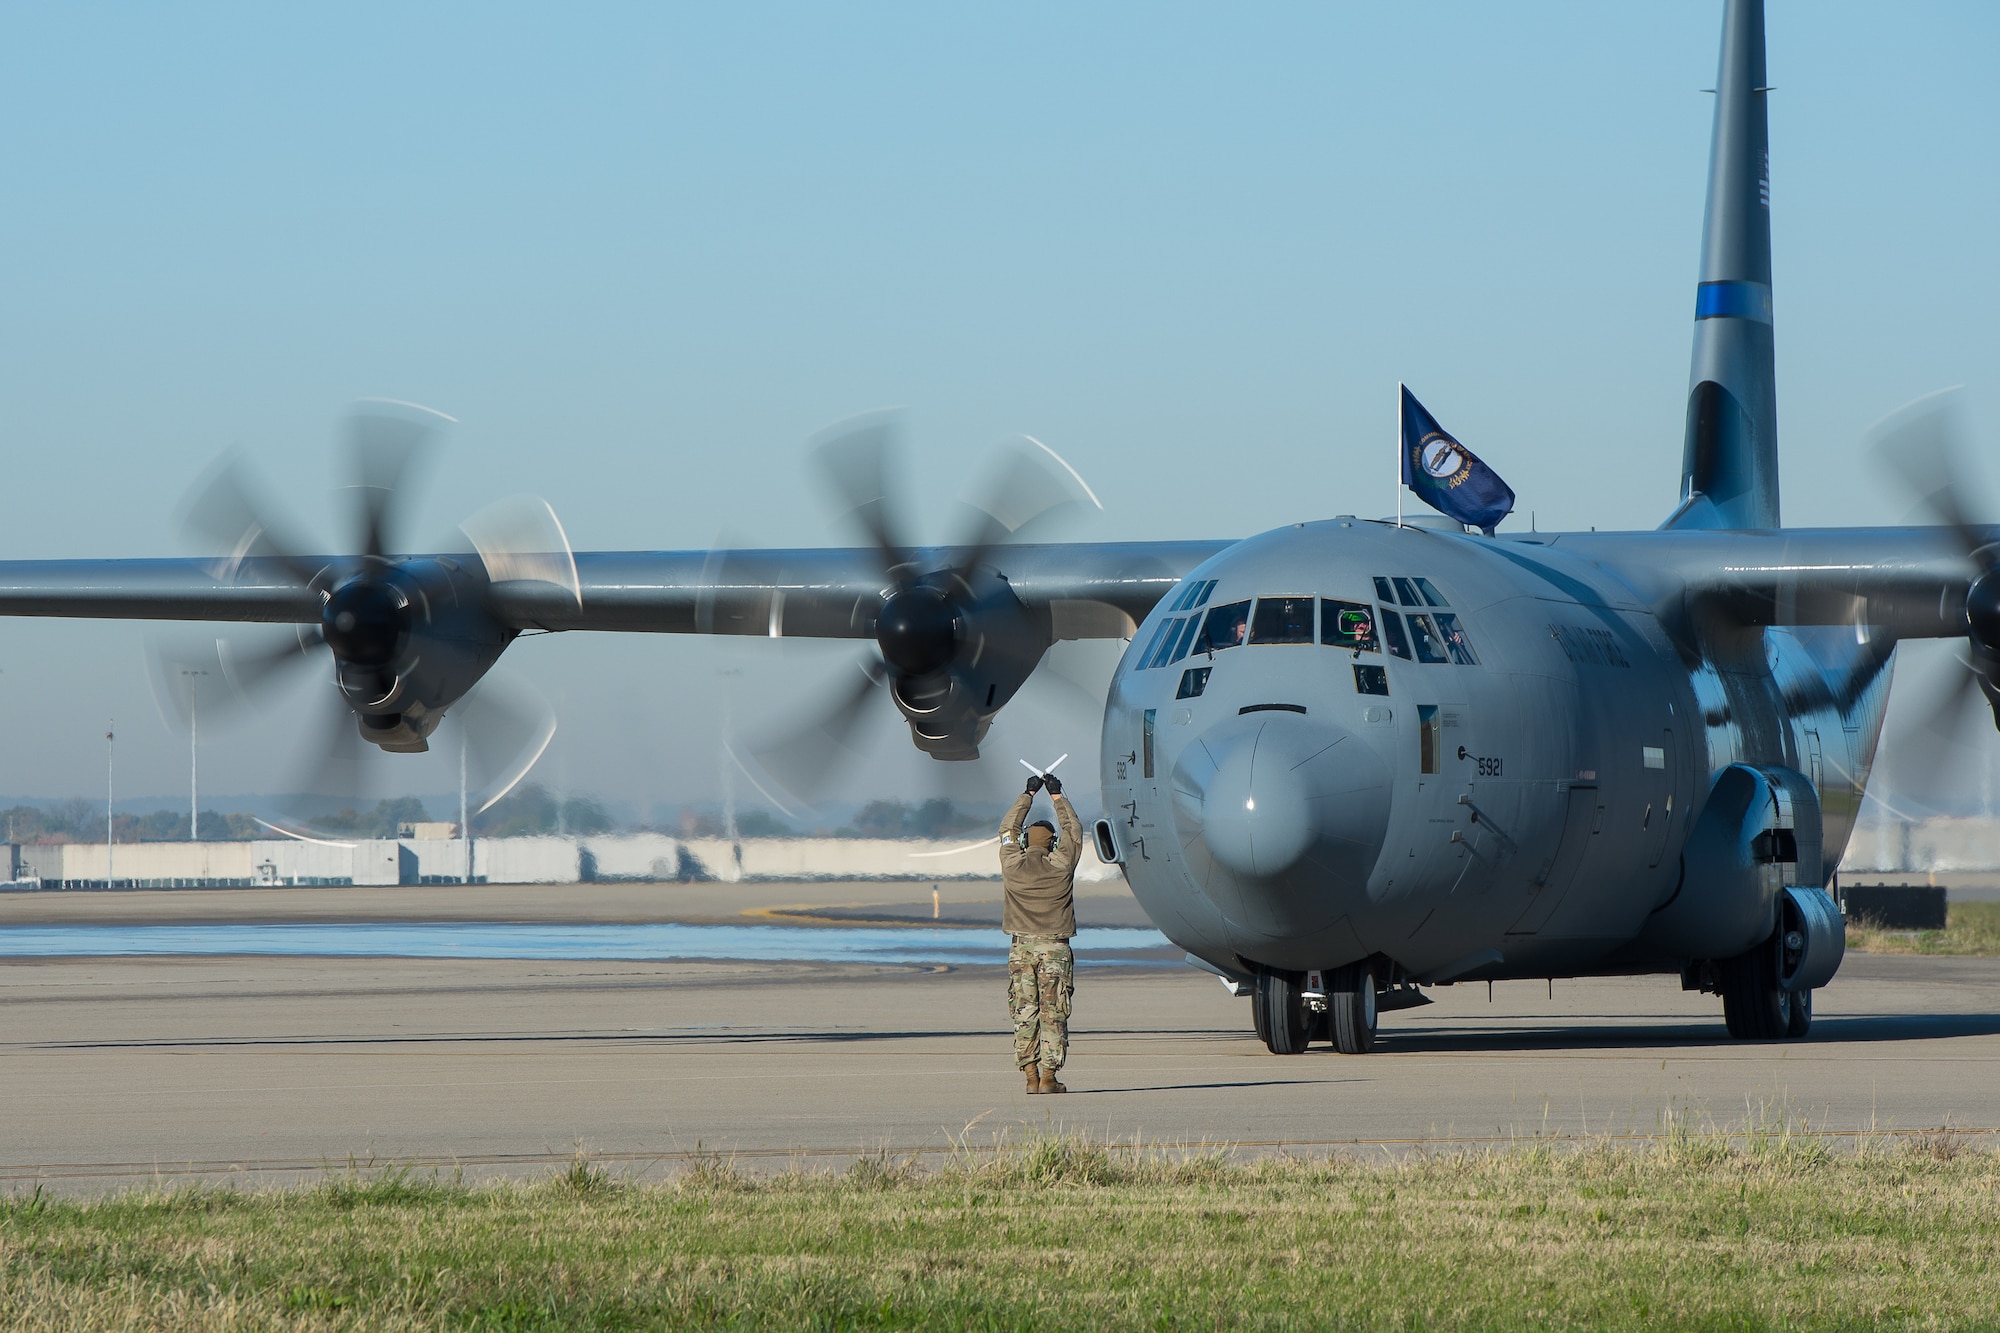 One of two new C-130J Super Hercules aircraft arrives at the Kentucky Air National Guard Base in Louisville, Ky., Nov. 6, 2021, ushering in a new era of aviation for the 123rd Airlift Wing. The state-of-the-art transports are among eight the wing will receive over the next 11 months to replace eight aging C-130 H-model aircraft, which entered service in 1992 and have seen duty all over the world. (U.S. Air National Guard photo by Staff Sgt. Clayton Wear)